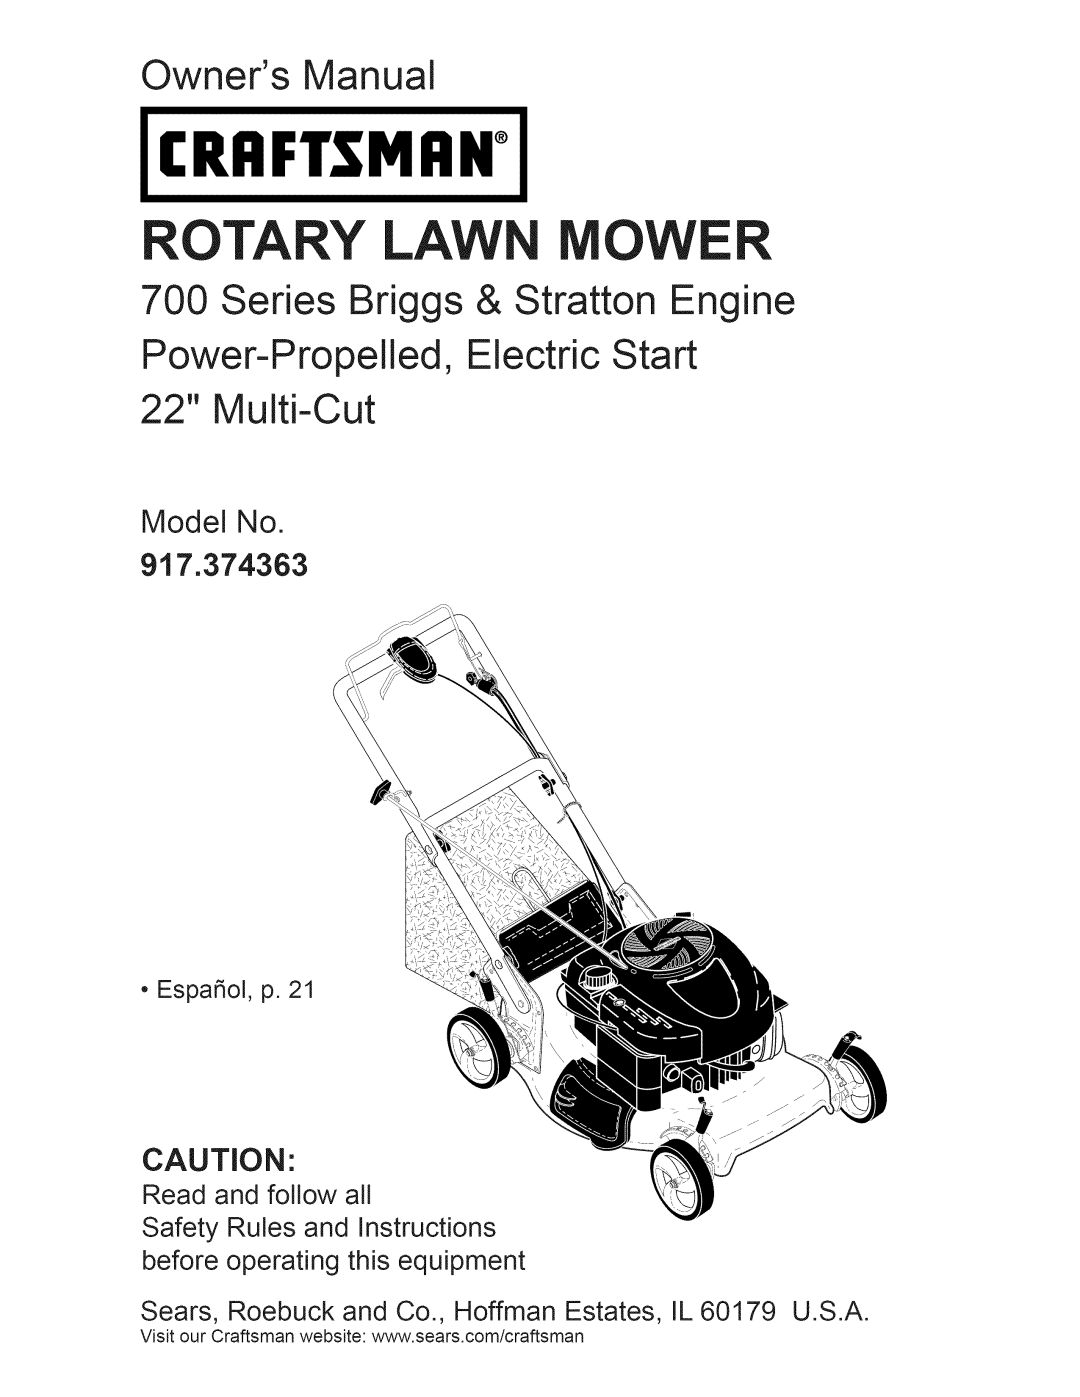 Craftsman manual Model No 917.374363, Craftsman, Rotary Lawn Mower, Owners Manual, Series Briggs & Stratton Engine 